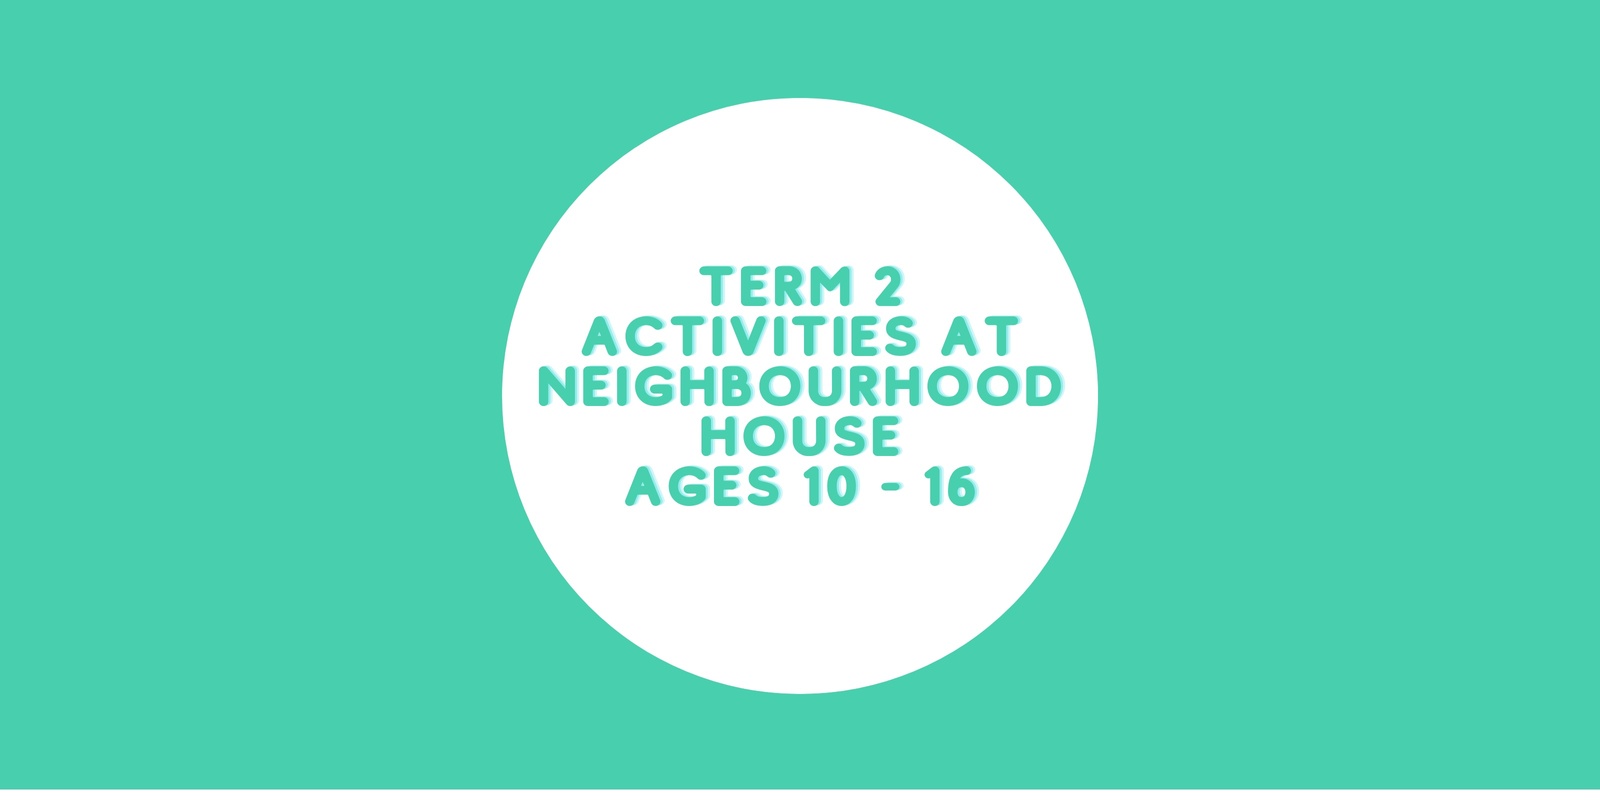 Banner image for Kingston Neighbourhood House Term 2 activities (ages 10 - 16)